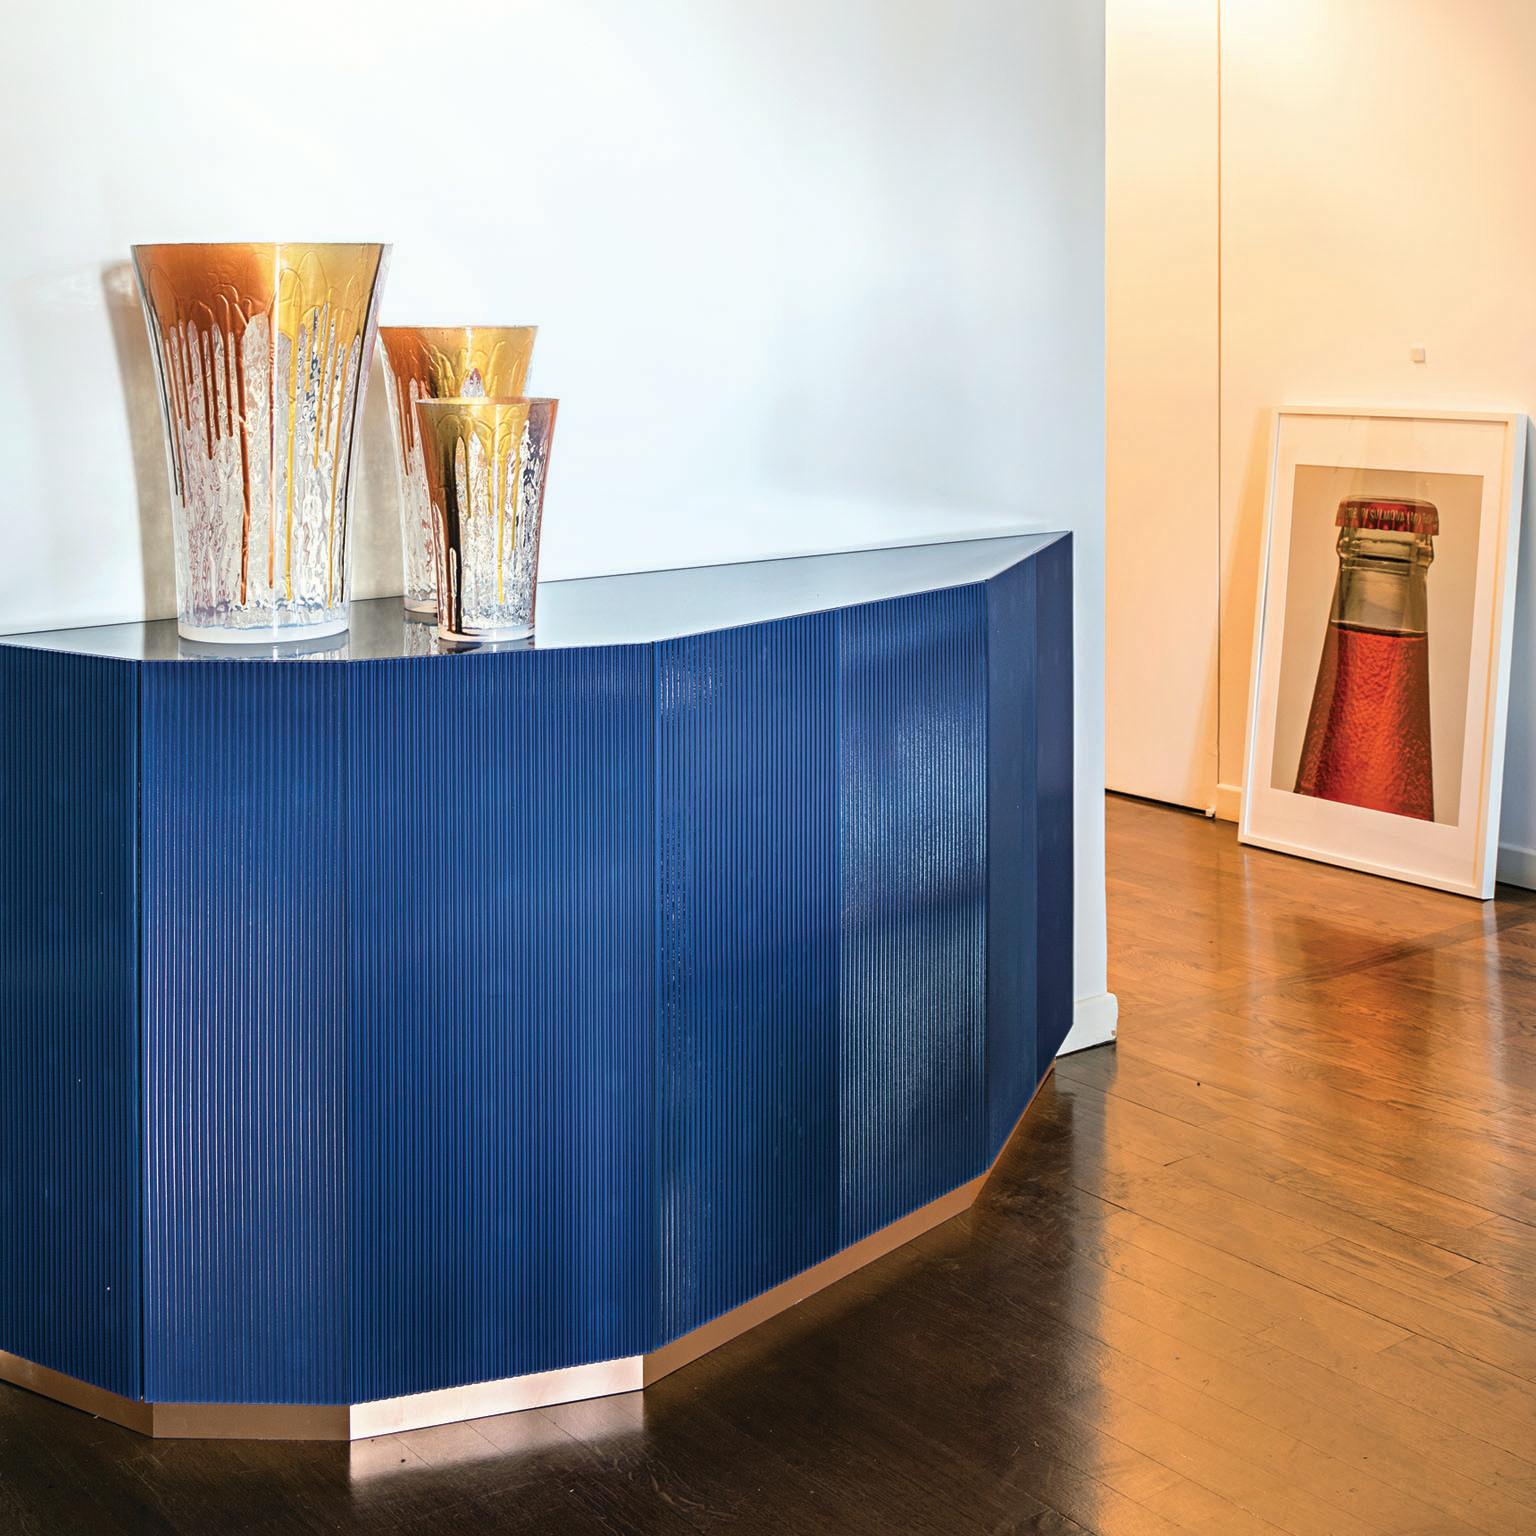 Contemporary Gem Pear Cabinet or Bar in Wood, Glass, and Copper (Italienisch) im Angebot